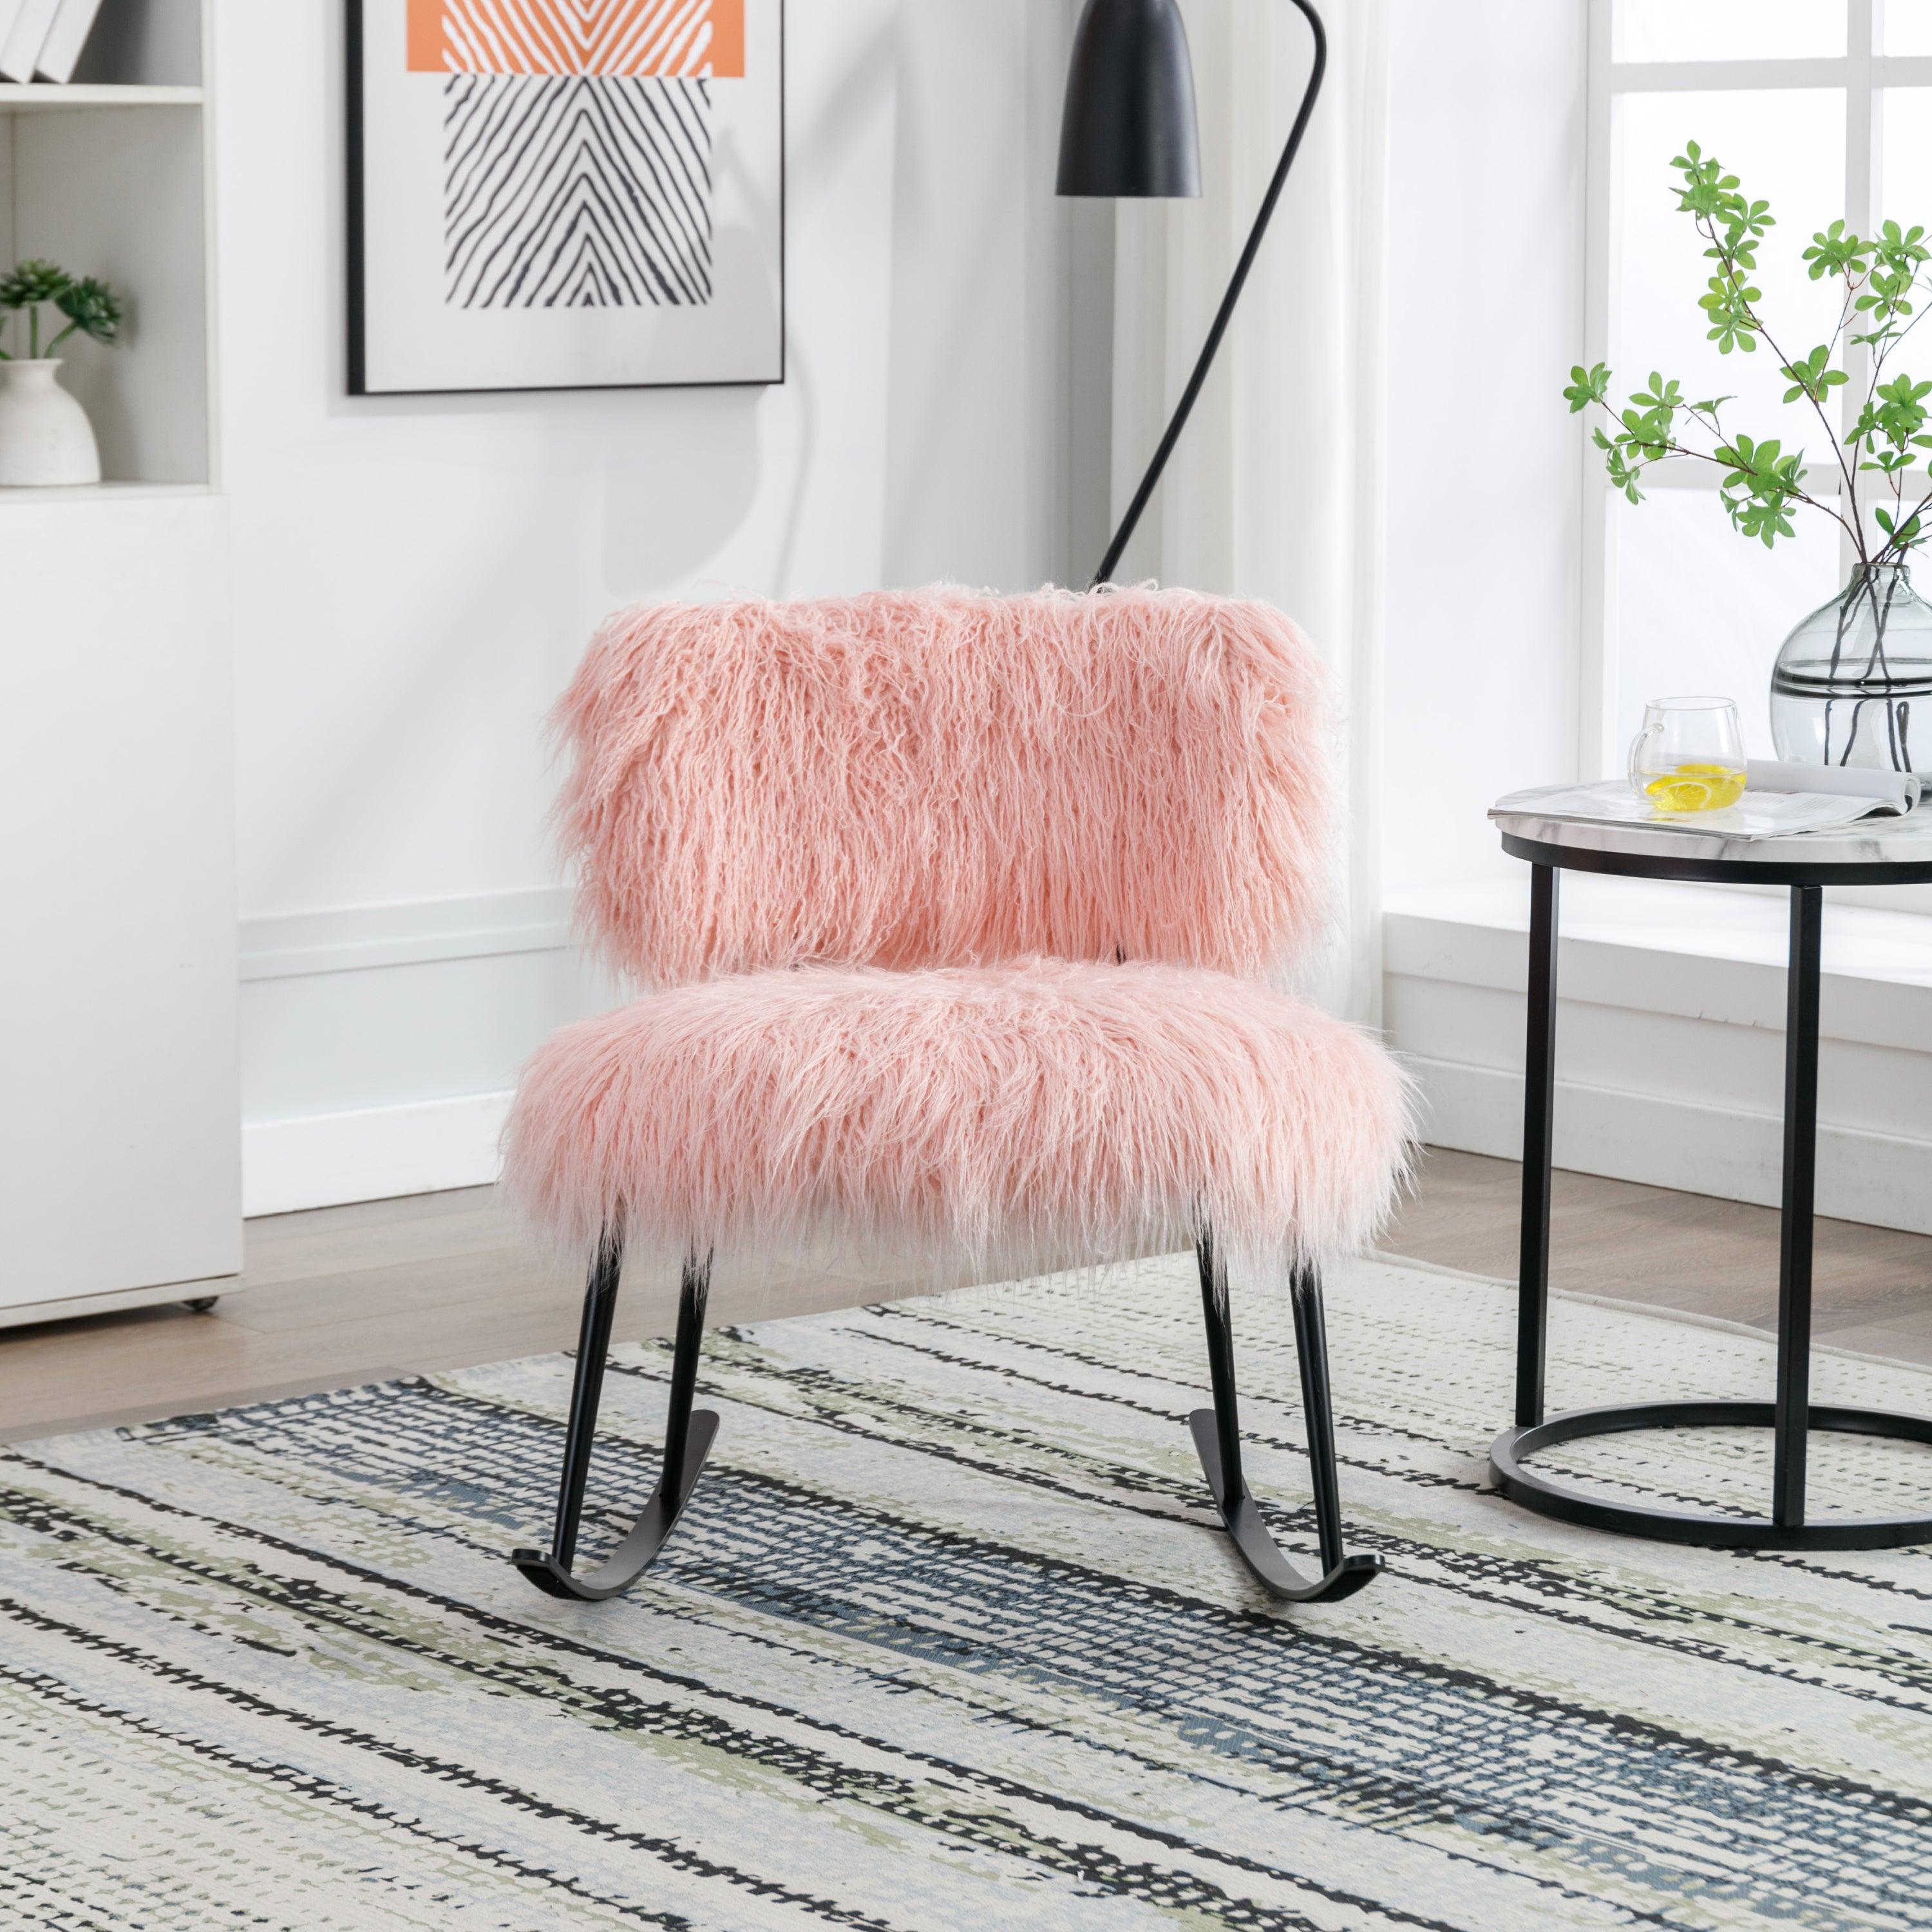 25.2'' Wide Faux Fur Plush Nursery Rocking Chair, Baby Nursing Chair with Metal Rocker, Fluffy Upholstered Glider Chair, Comfy Mid Century Modern Chair for Living Room, Bedroom (Pink) LamCham